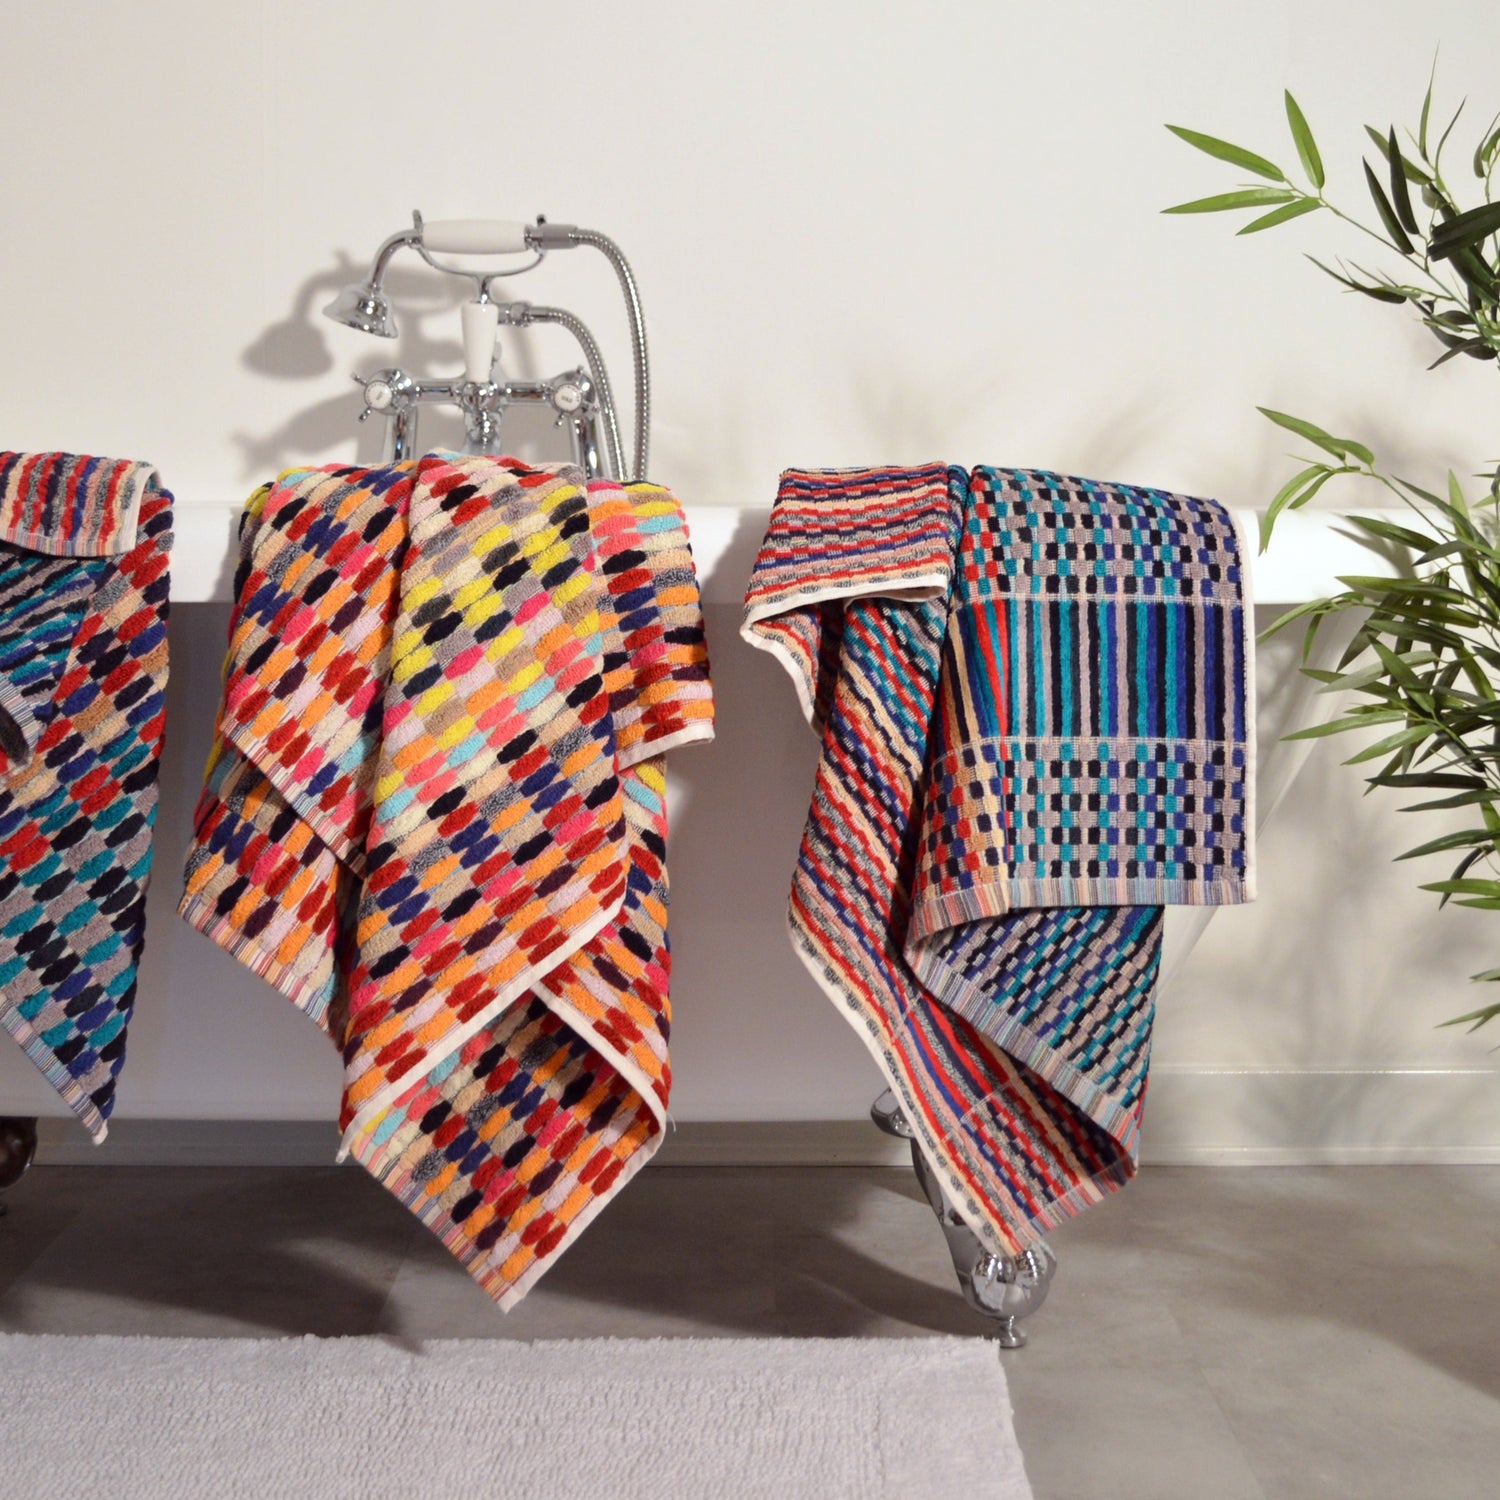 Remnant Recycled Cotton Towels - Sustainable Bathroom Towels- Dark Colourful